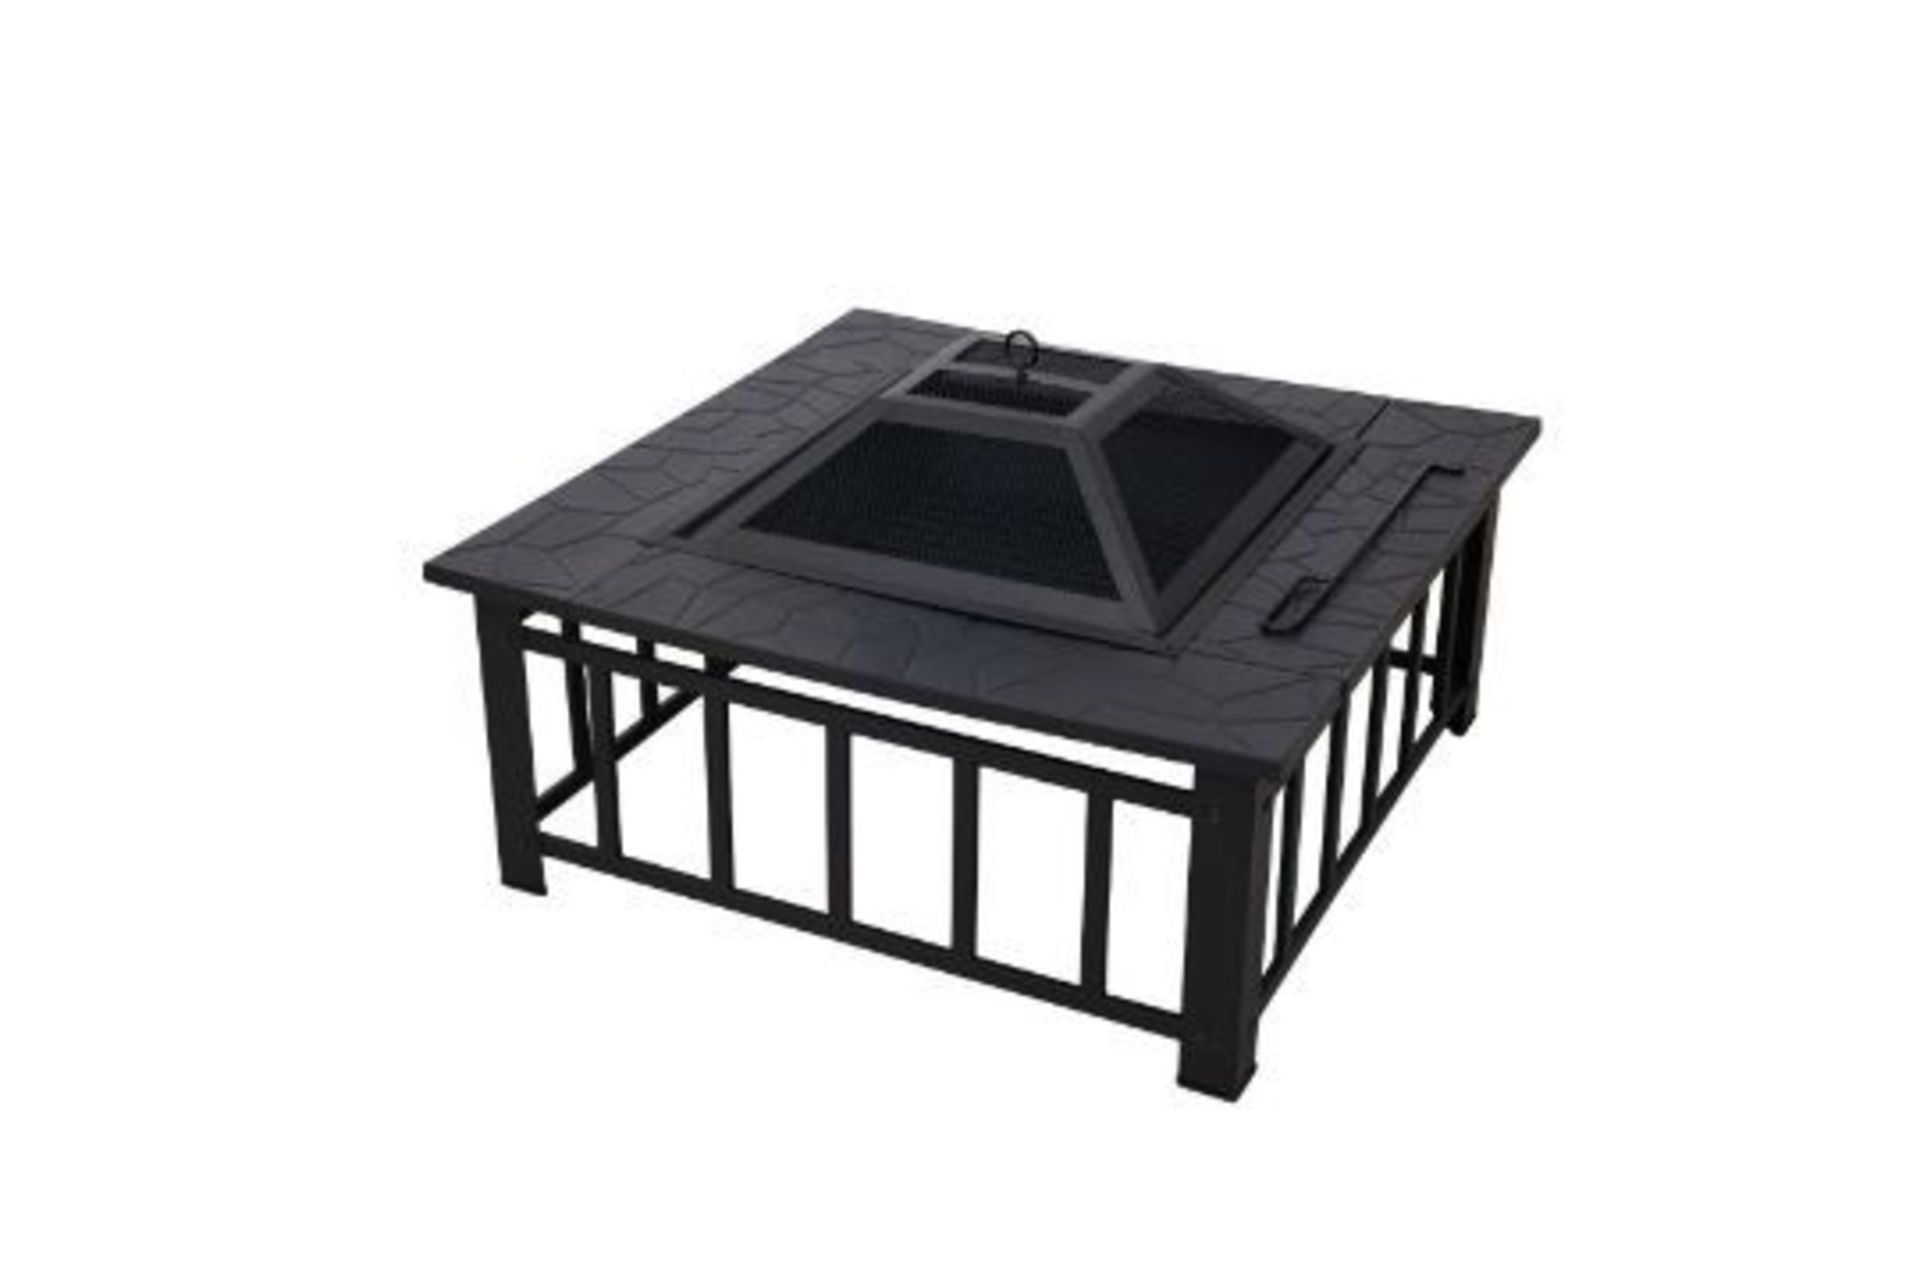 New Boxed Outdoor 3 in 1 BBQ, Large Firepit, Ice Bucket & Garden Square Table. RRP £249.99. Planning - Image 3 of 3